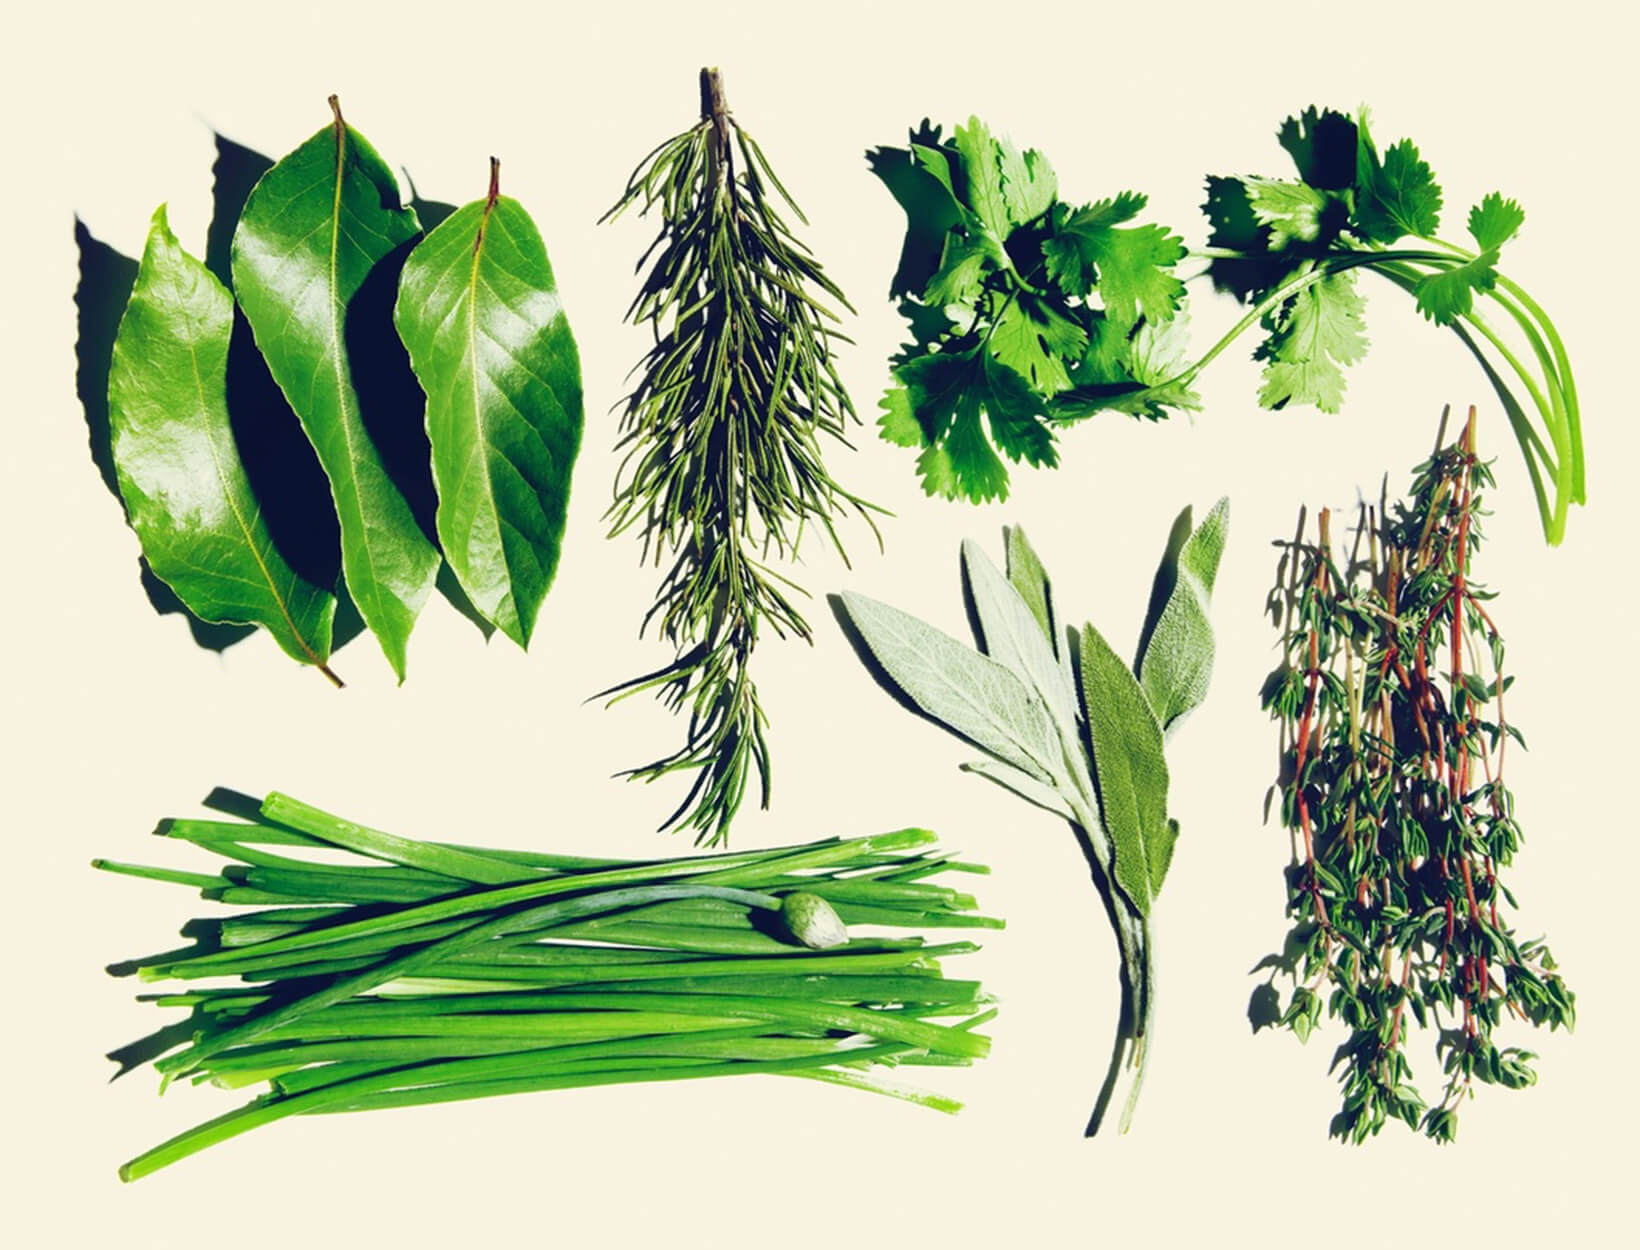 The Ultimate Spring Project: An Easy Herb Garden | Goop